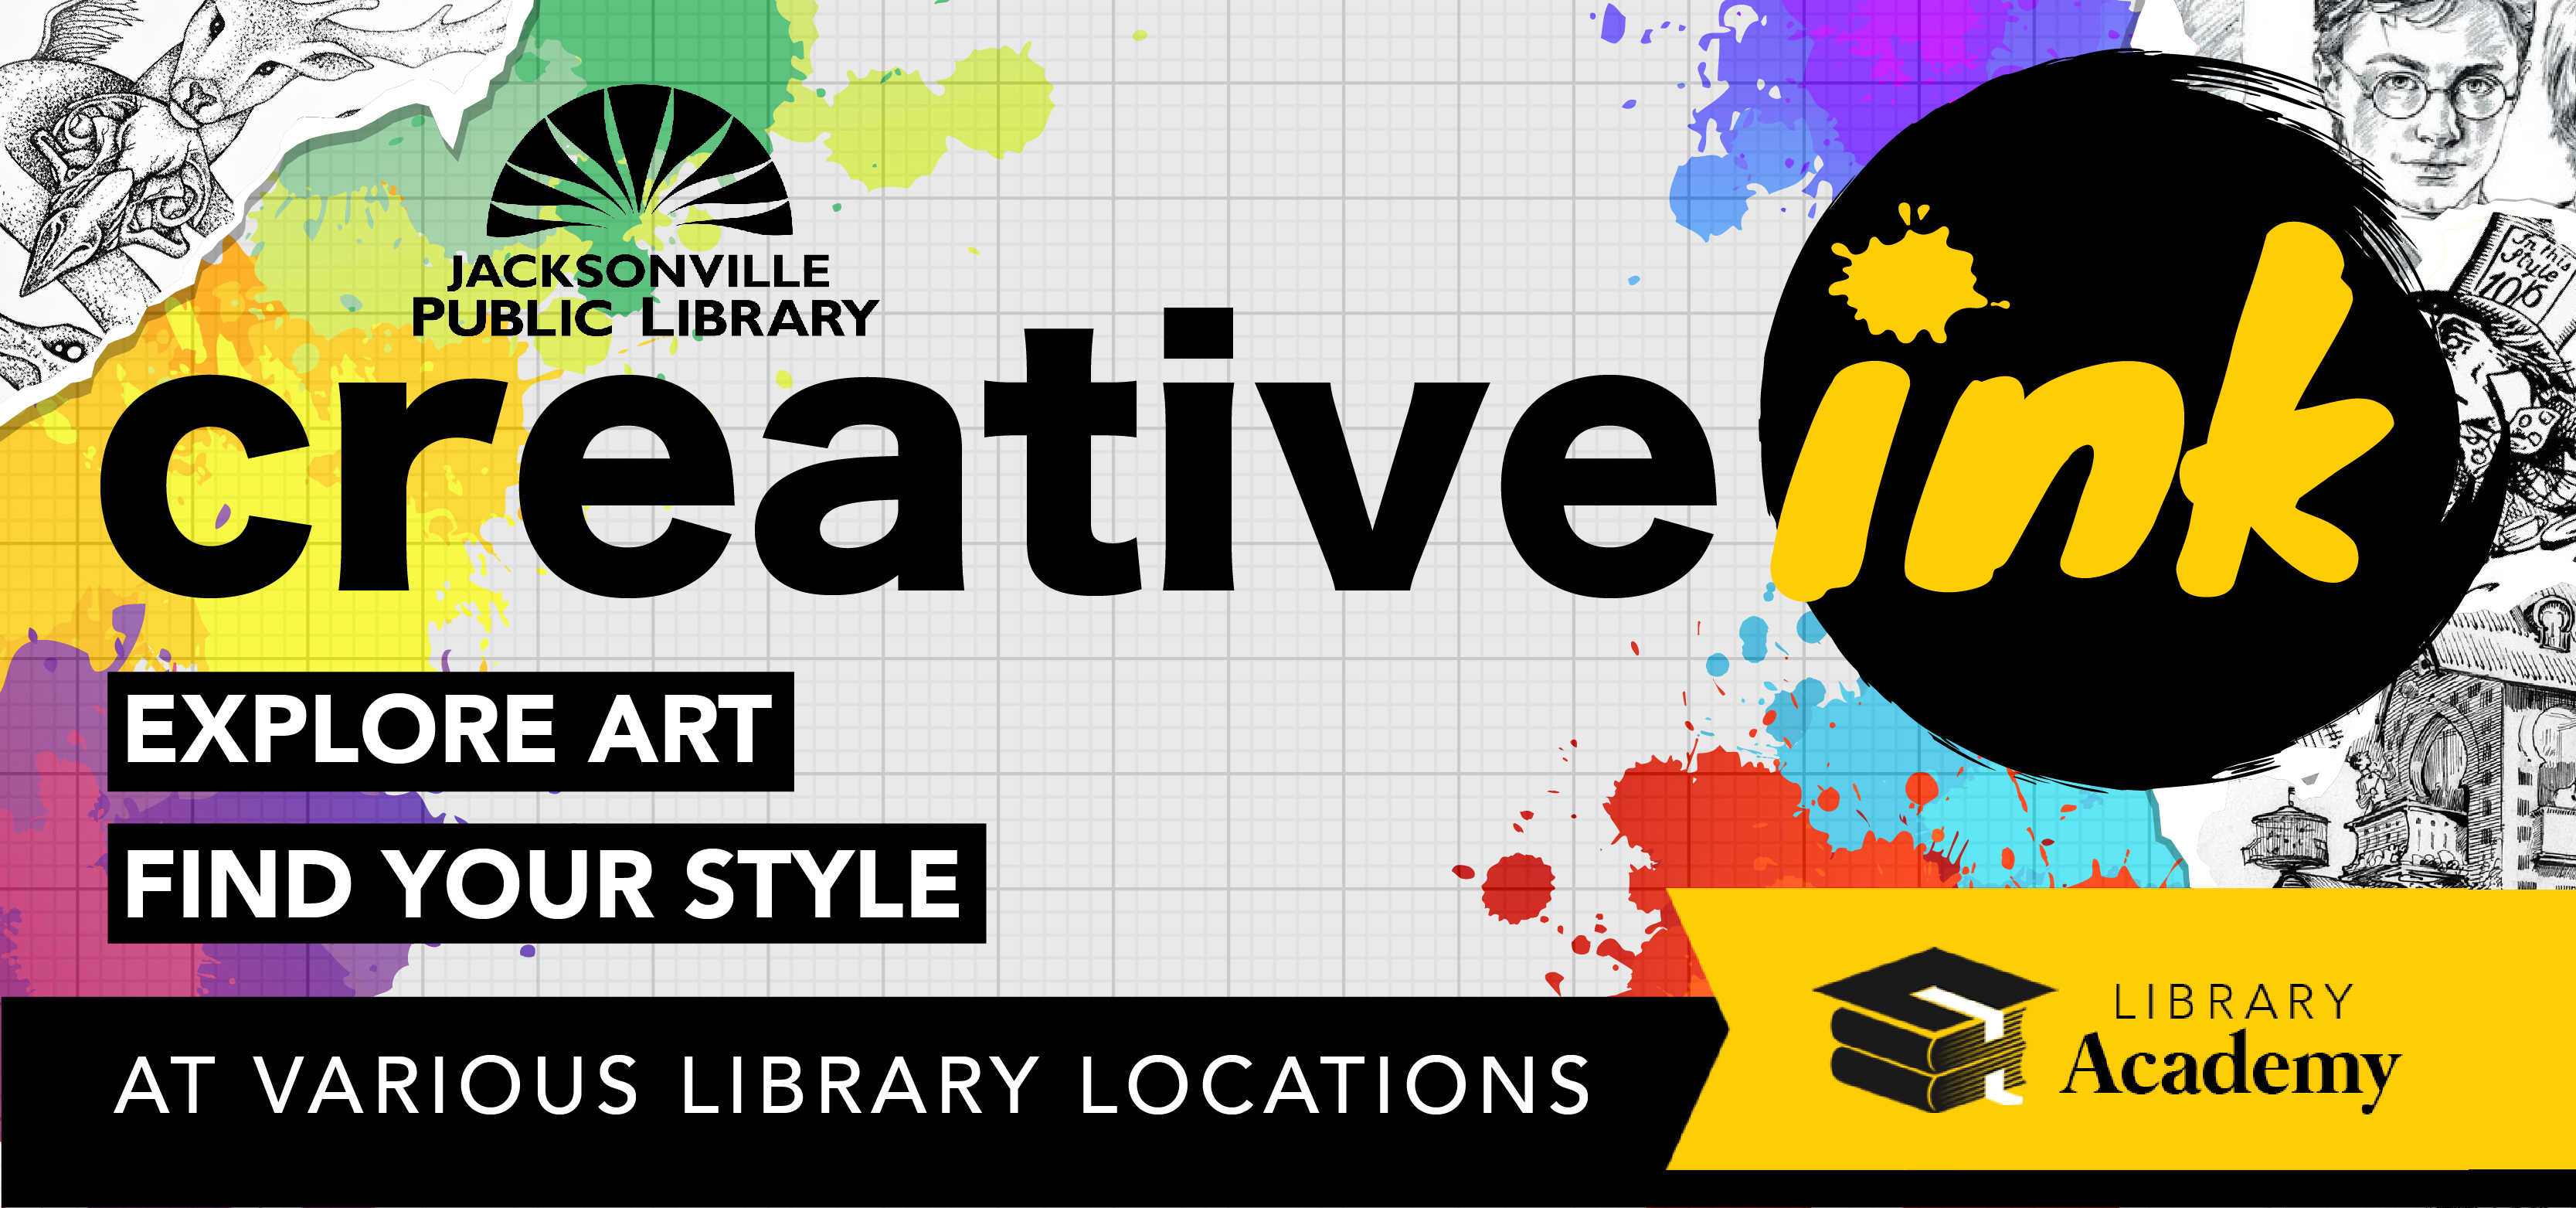 Creative Ink - Explore Art, Find Your Style at Brentwood, Argyle, Southeast, and Beaches branches